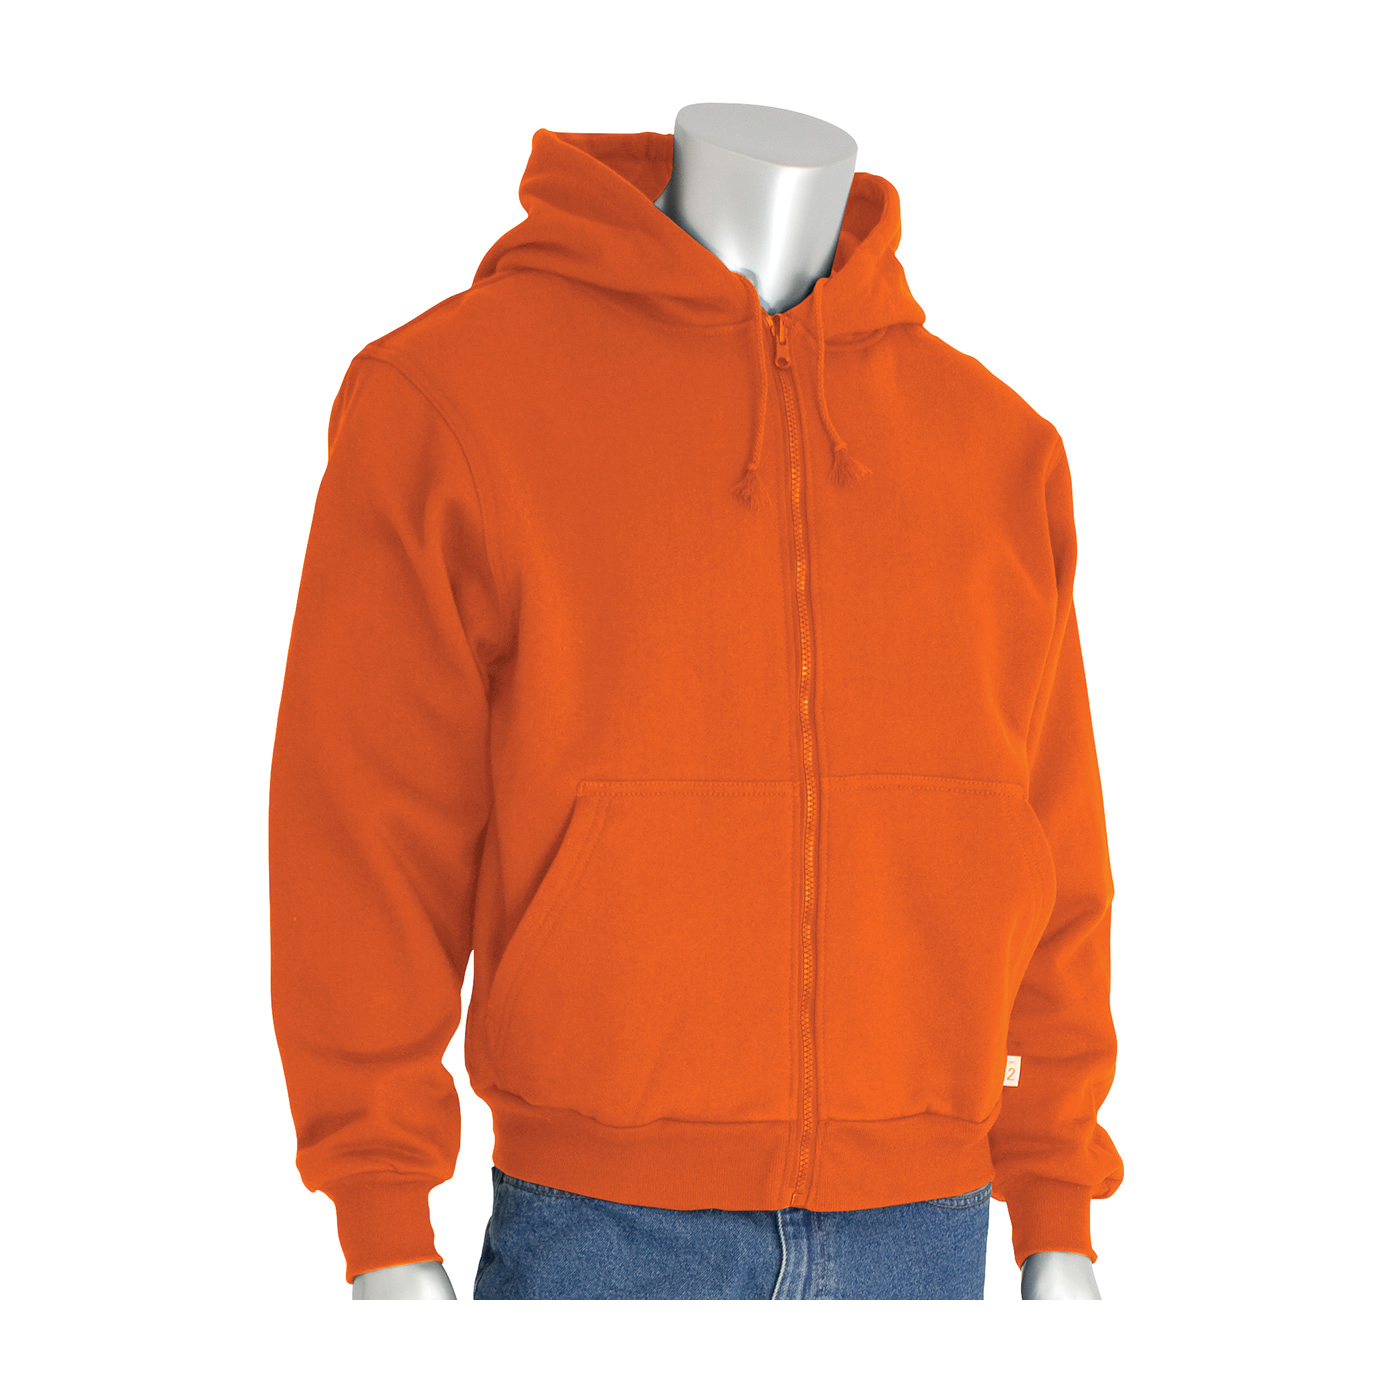 PIP® 385-FRZH-OR/3X Polartec® 385-FRZH Arc and Flame Resistant Sweatshirt, 3XL, Orange, FR Fleece Knit/100% Cotton, 31-1/2 in Regular, 32-1/2 in Tall L